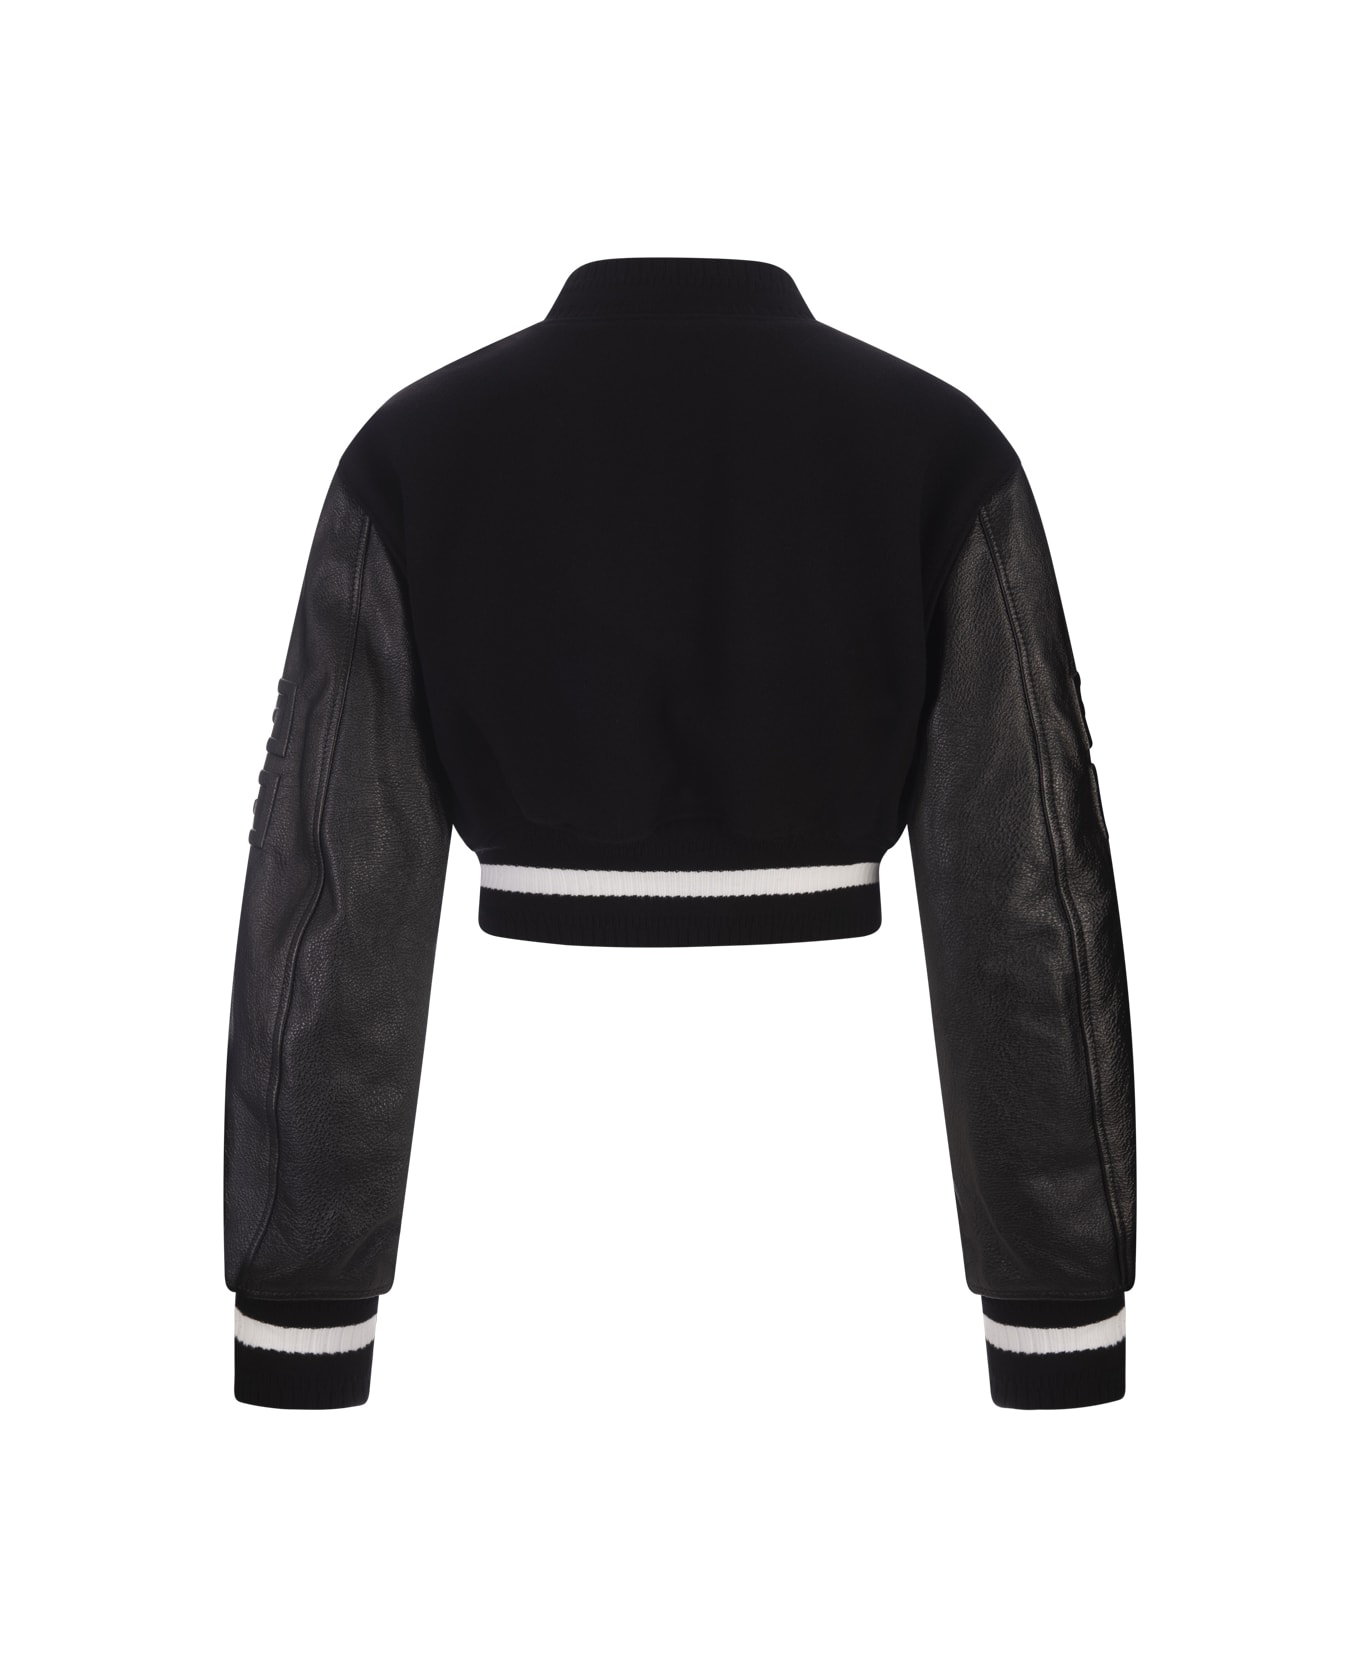 Givenchy Black Givenchy Short Bomber Jacket In Wool And Leather - Black